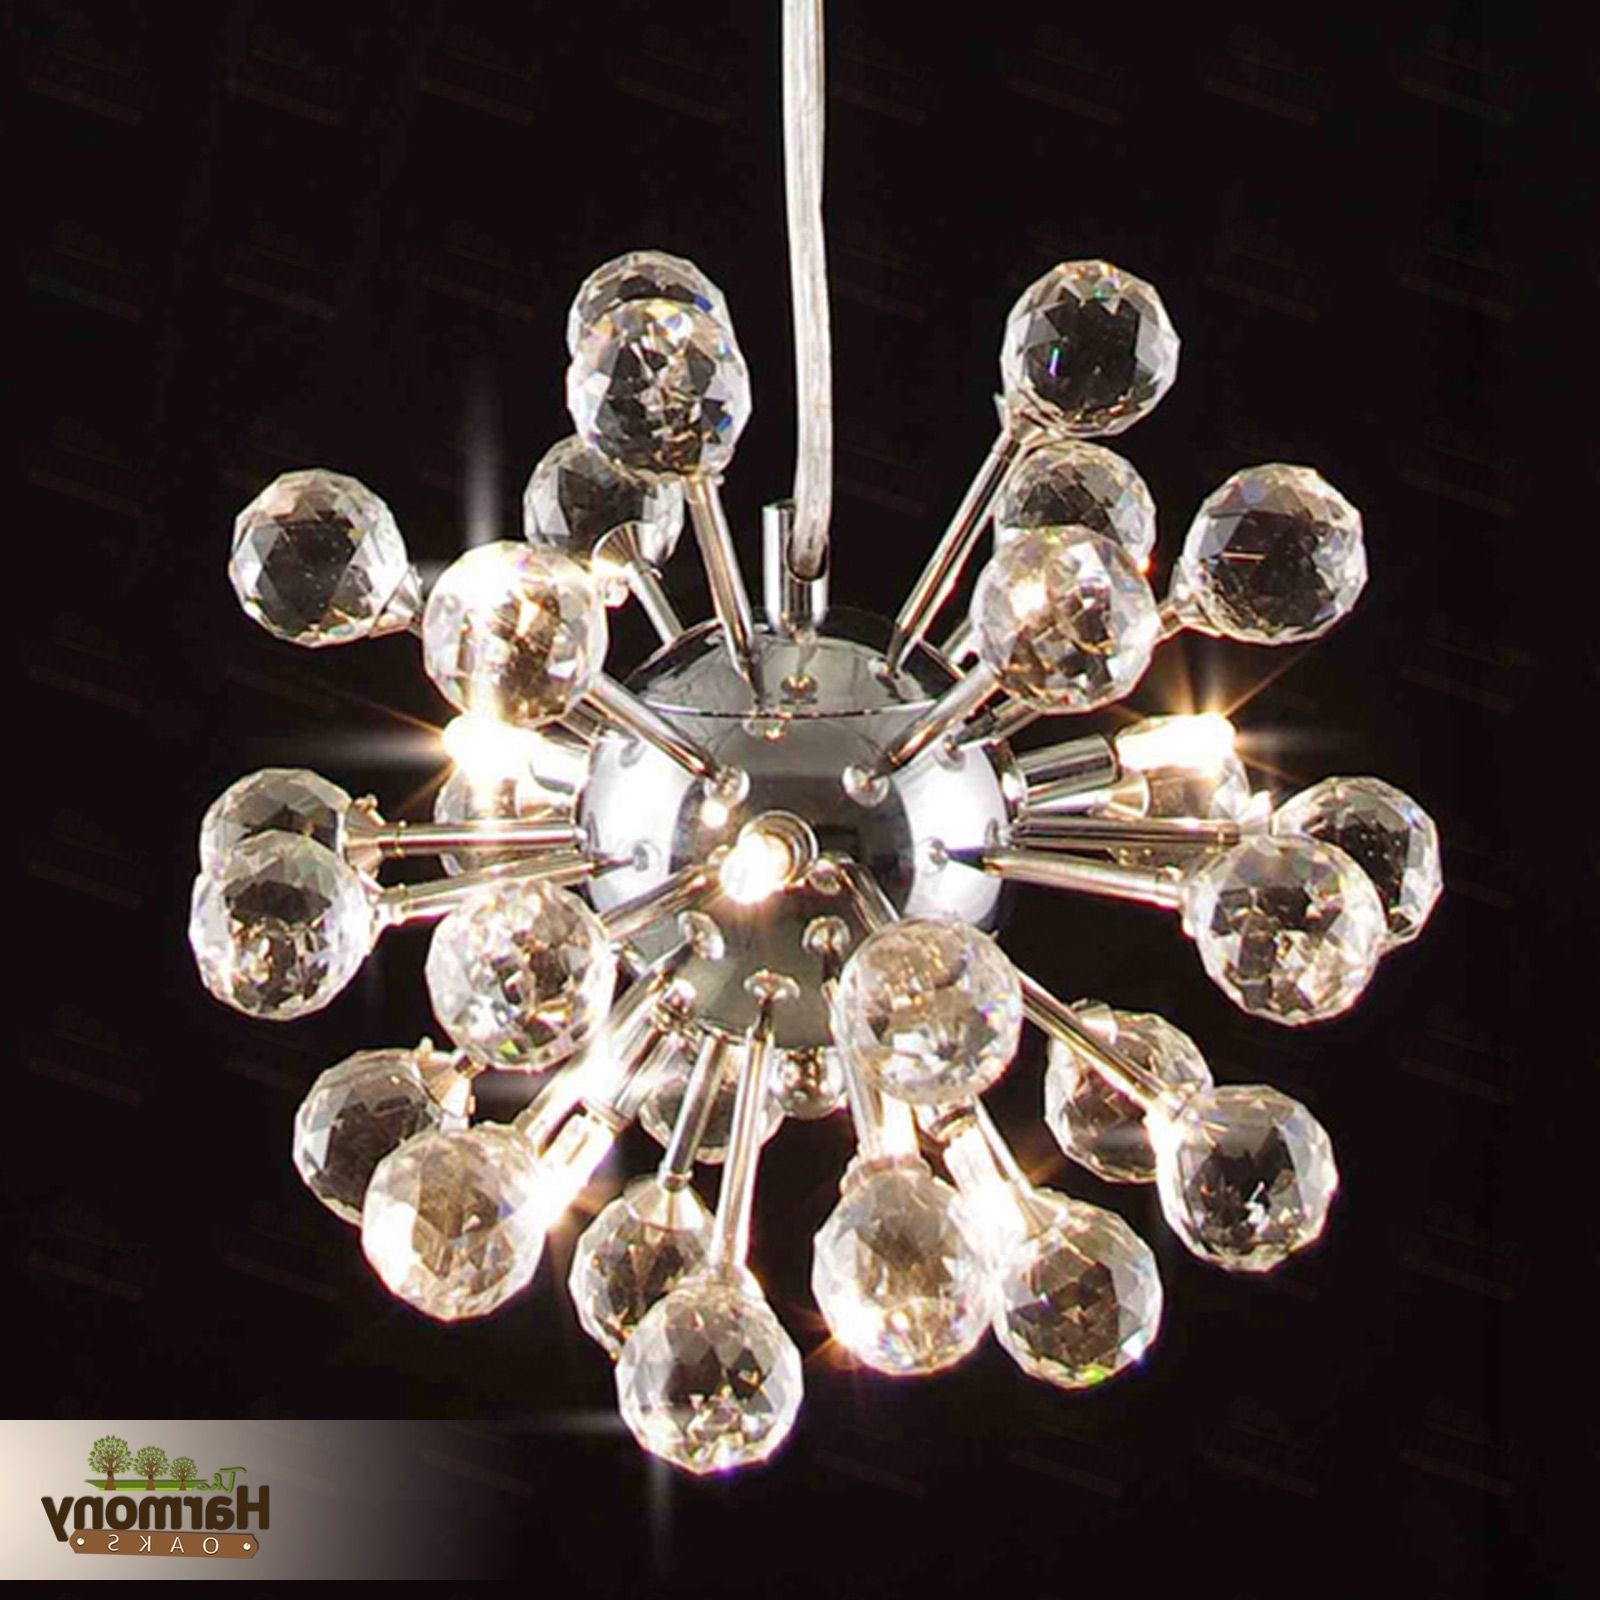 Chandelier Crystal Light Vintage Ceiling Art Glass Lighting 6 Modern Pertaining To Current Modern Glass Chandeliers (View 9 of 15)